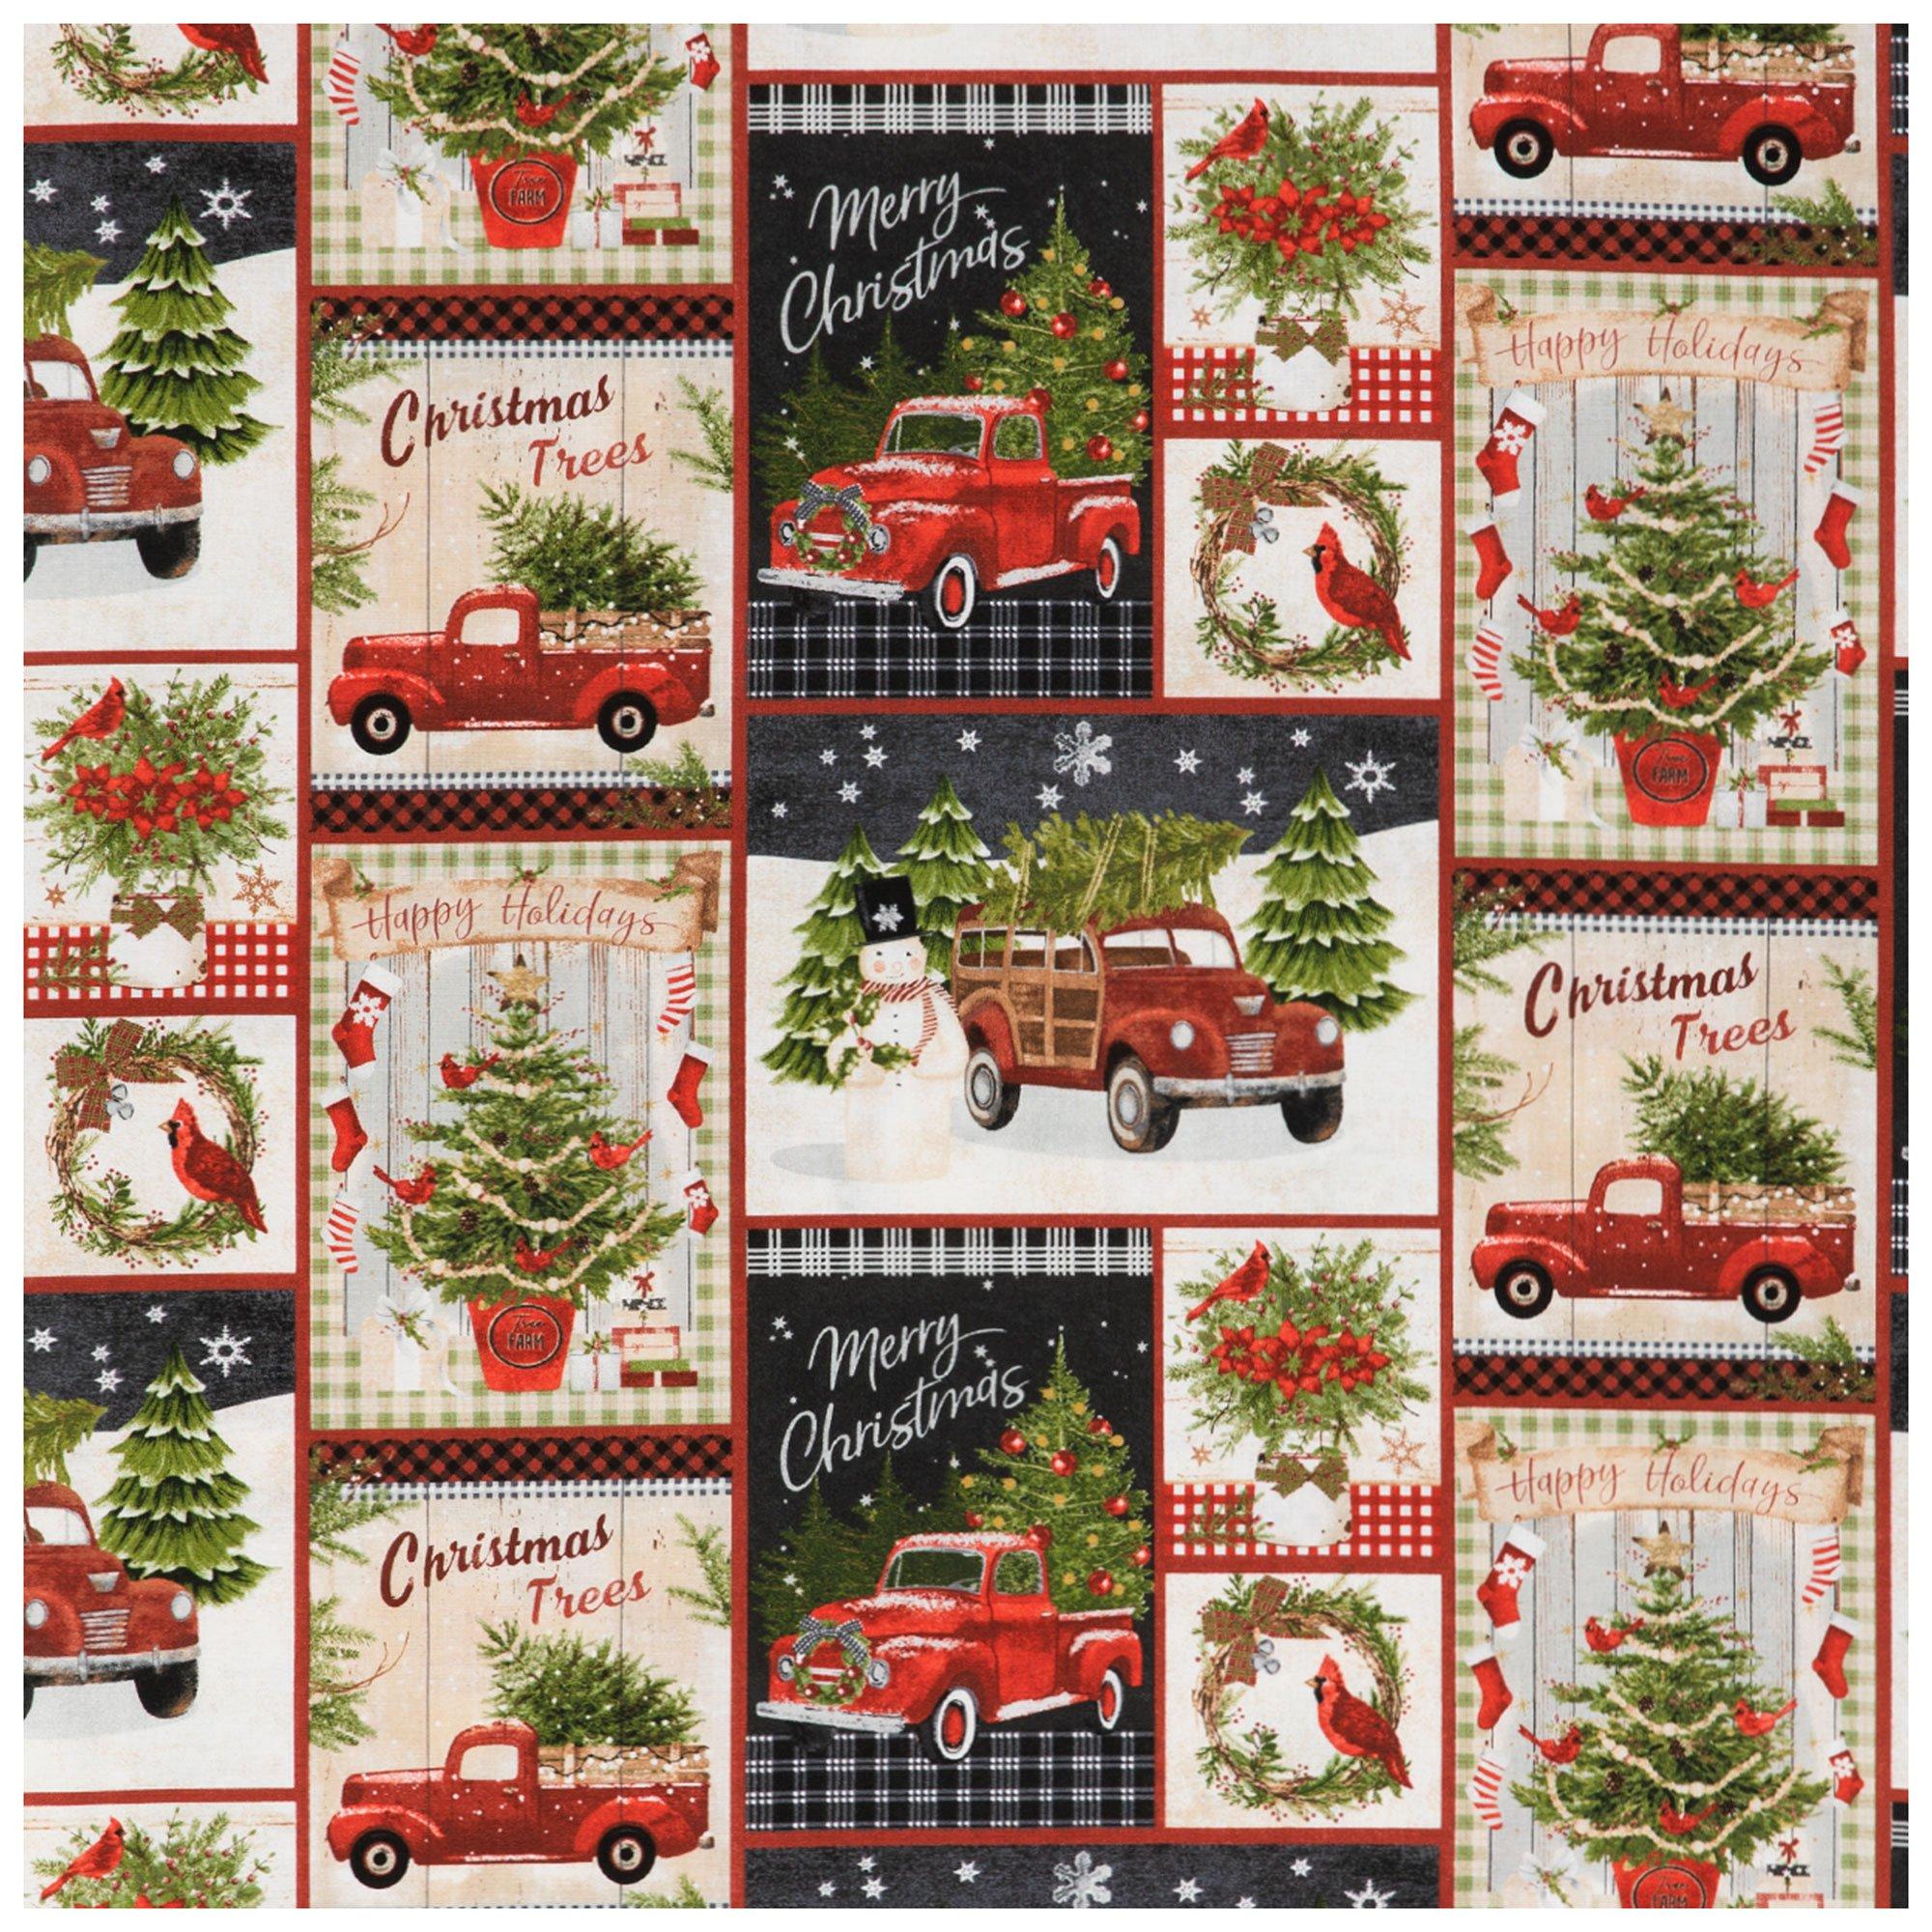 College Fabric Store University of Louisville Christmas Allover Cotton Fabric